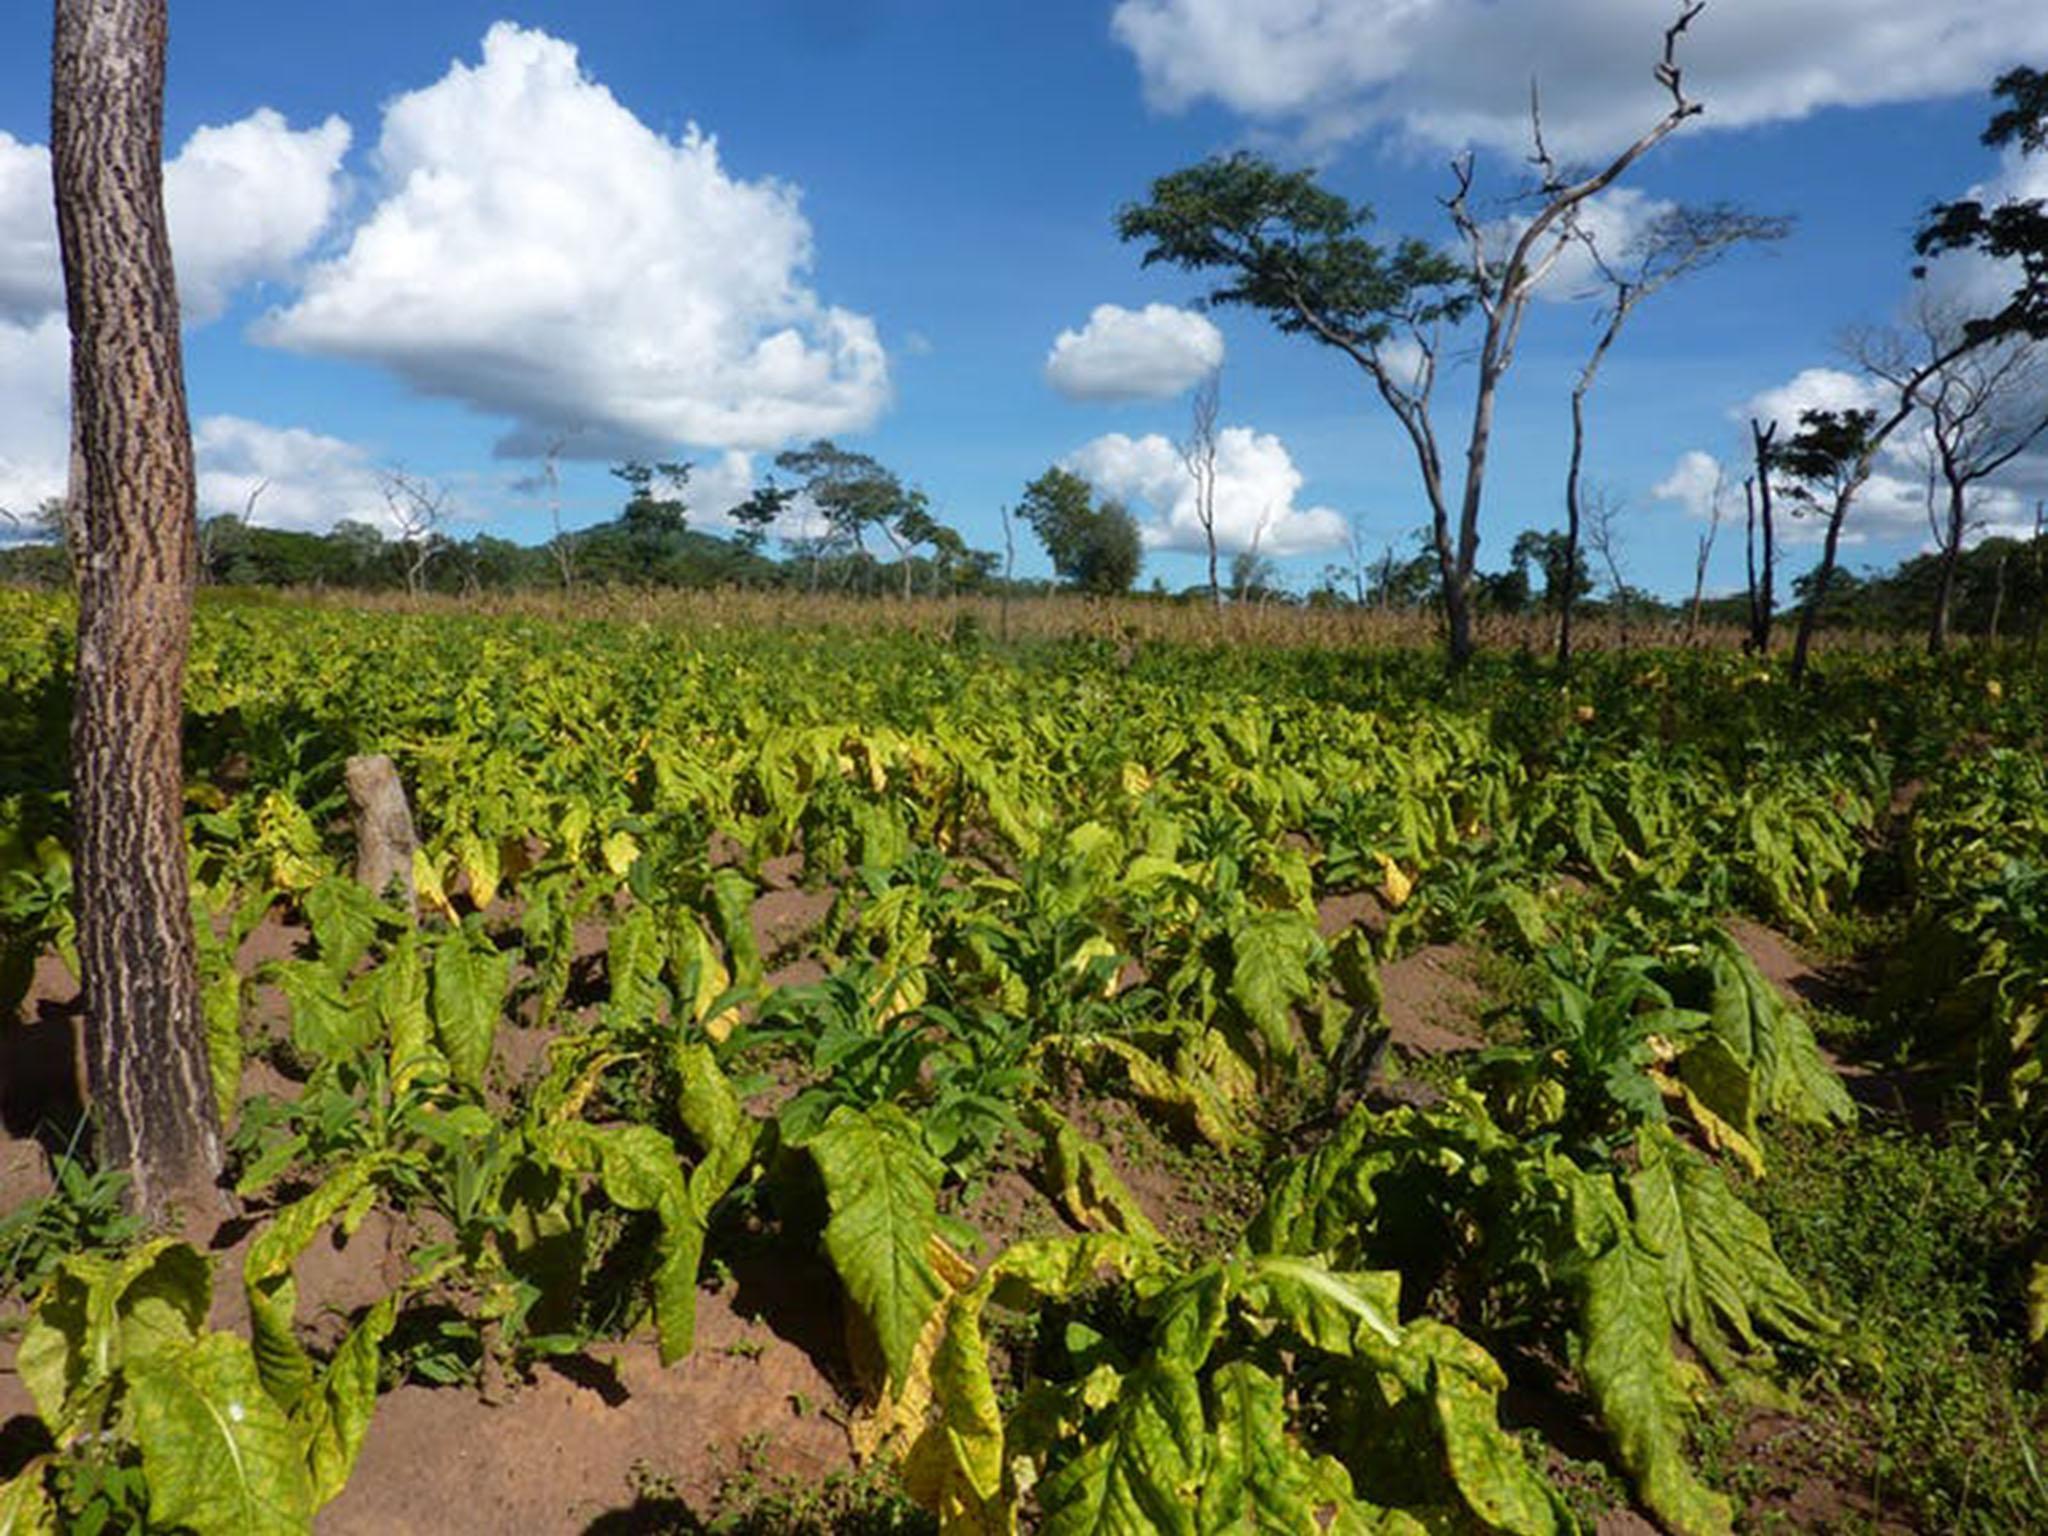 There are few crops people can grow in rural Tanzania to make money and the dominant one is tobacco